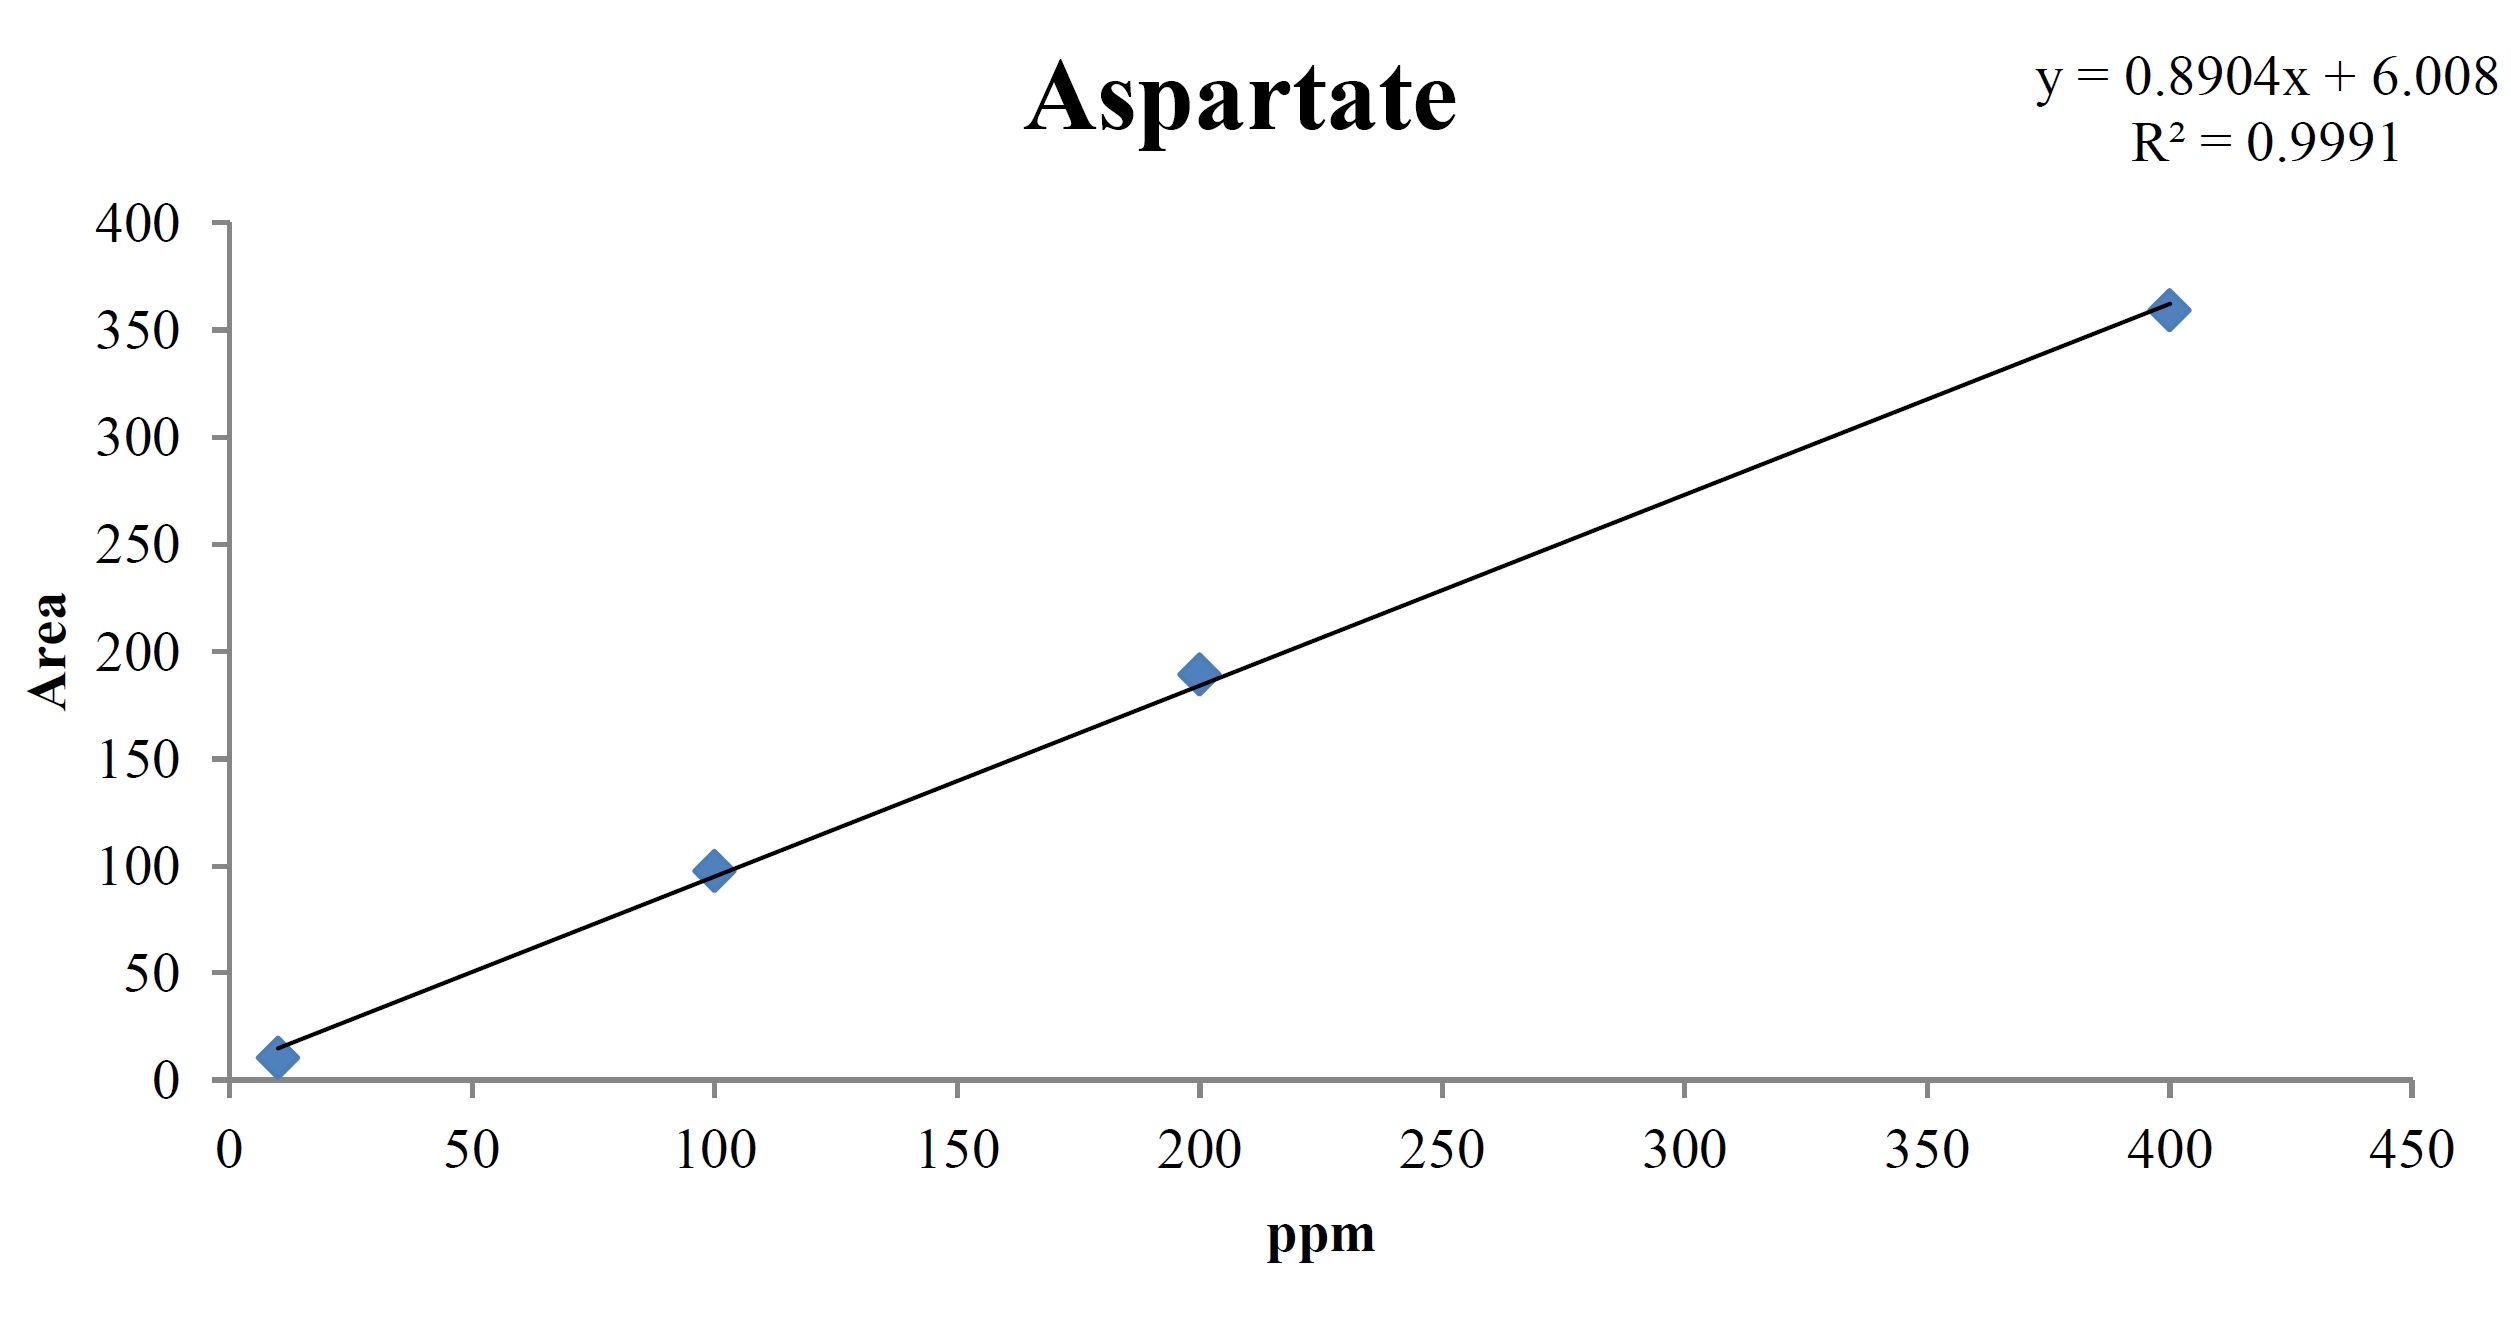 Analytical calibration curve of aspartate STD for concentrations of 400, 200, 100, and 10 ppm.